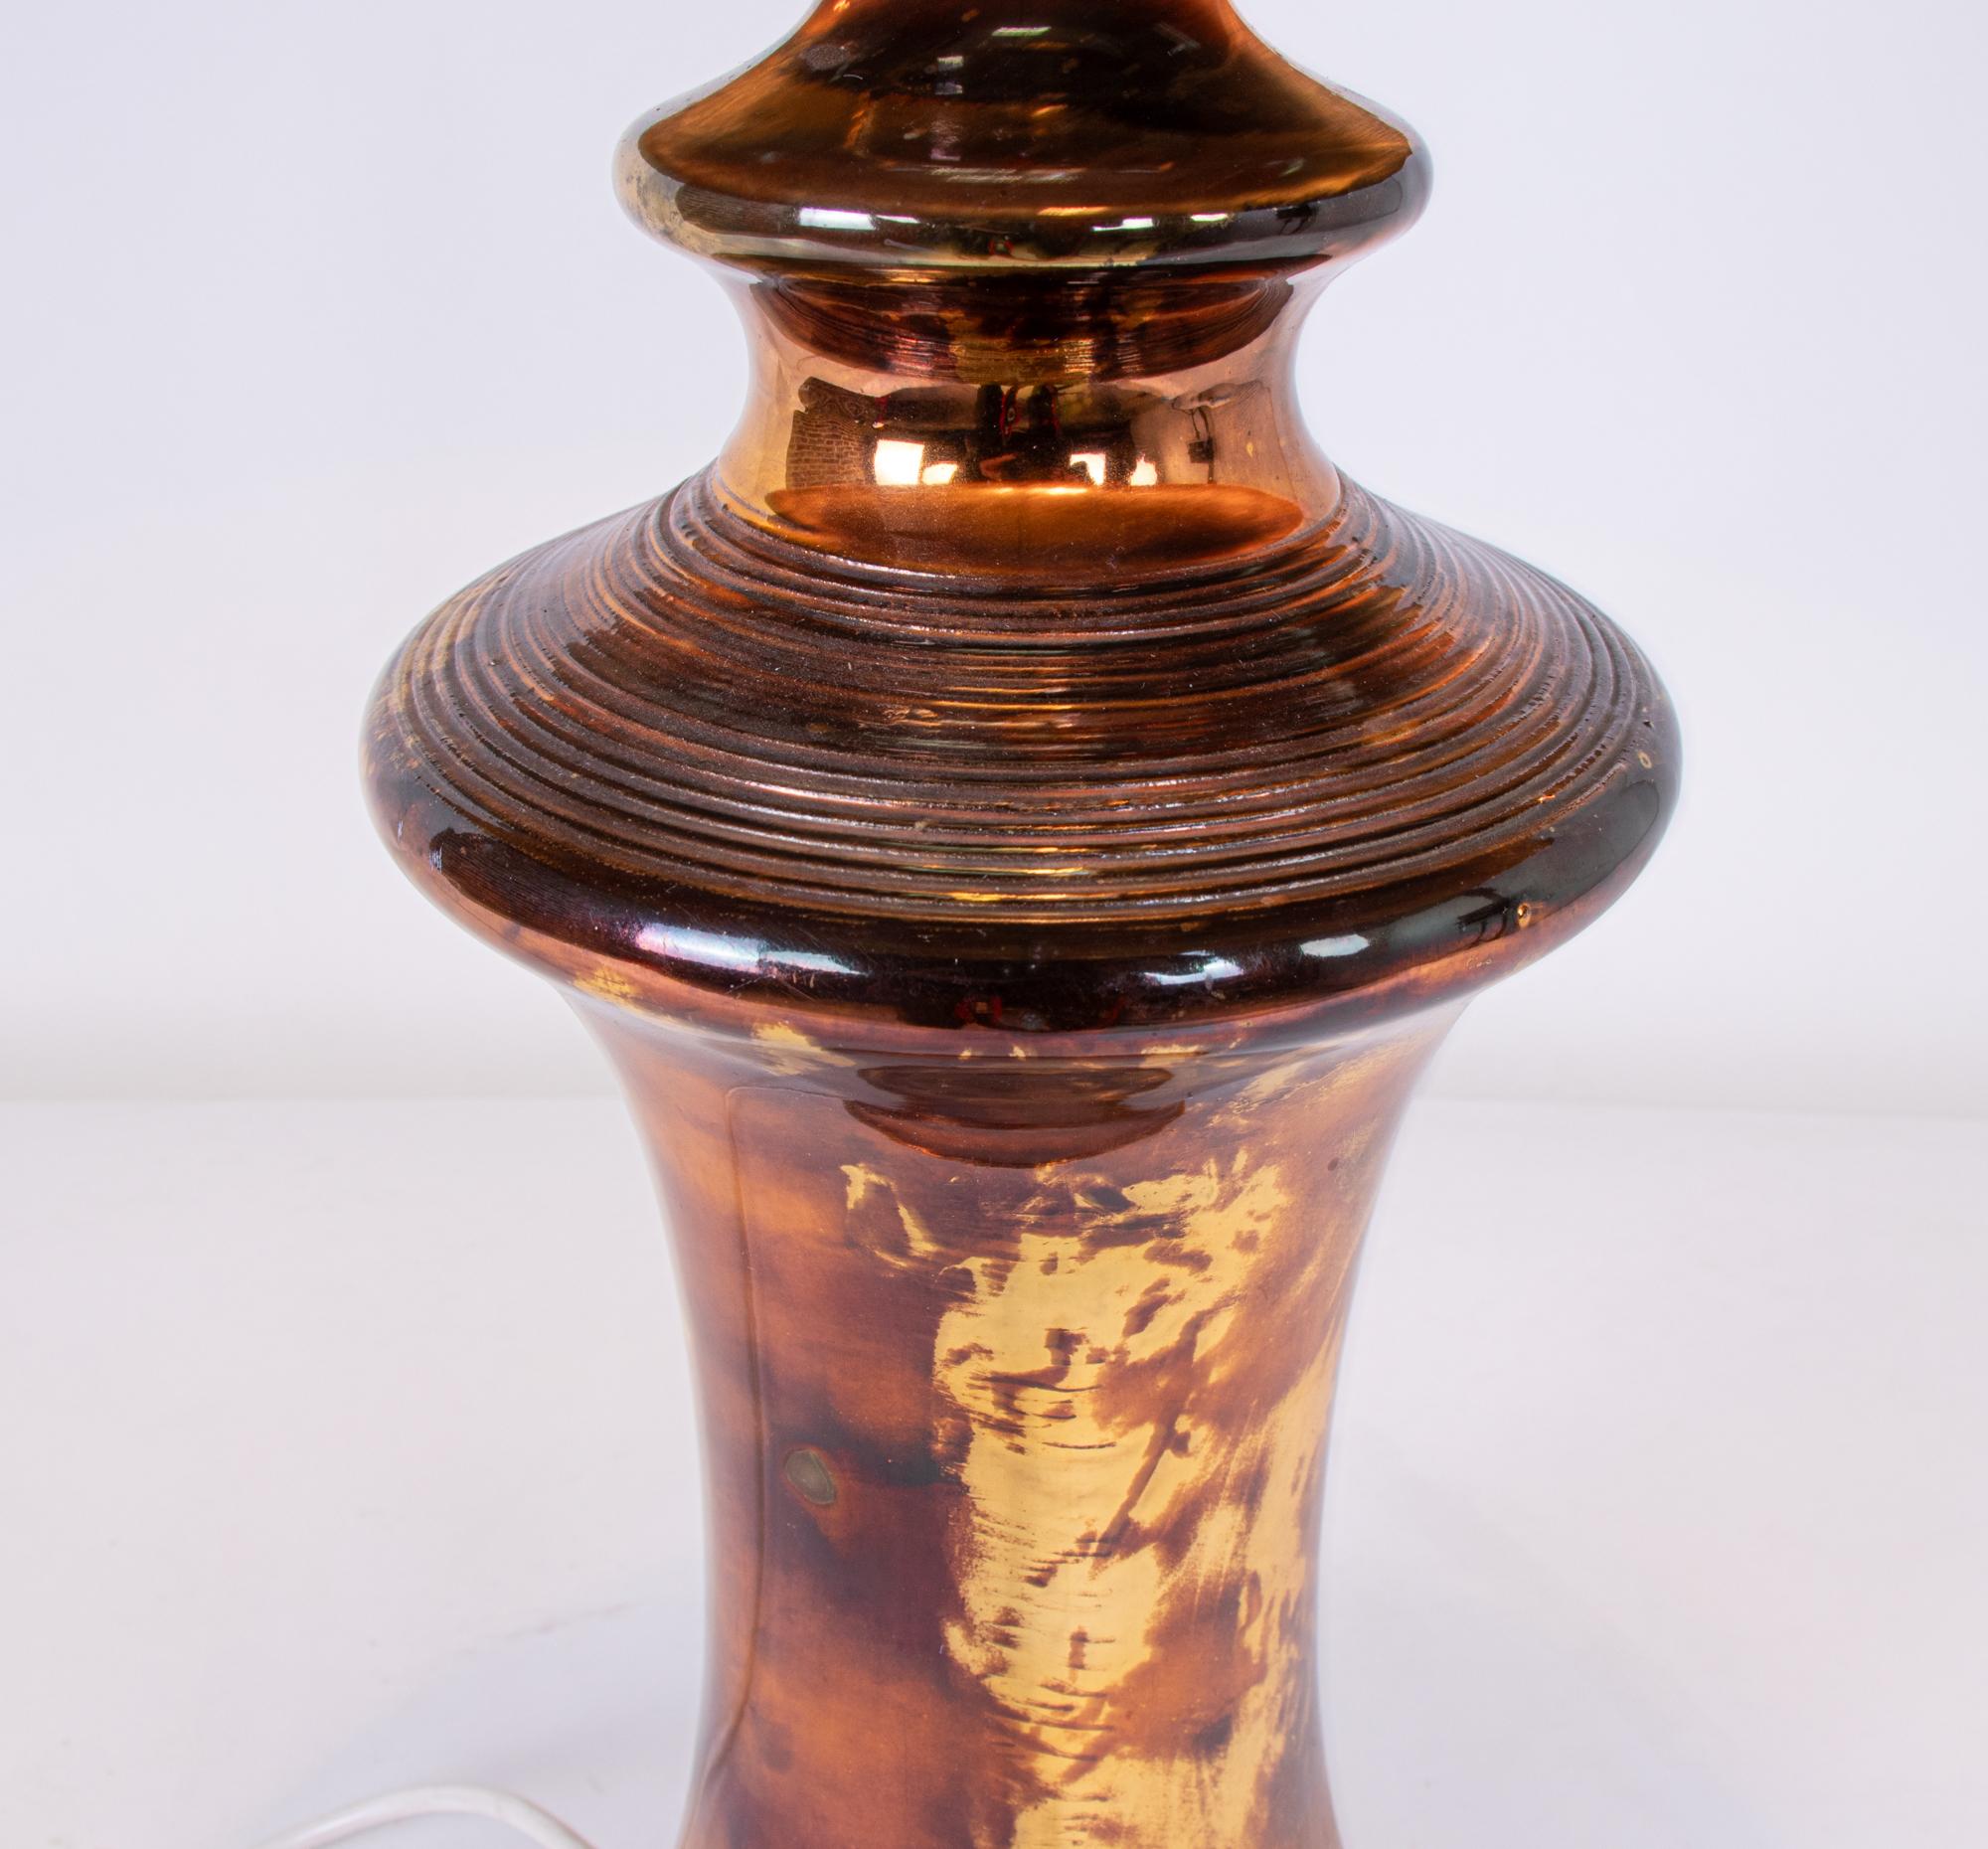 Hand-Crafted Bitossi Table Lamp in Metallic Bronze & Gold Ceramic, Italy 1960s For Sale